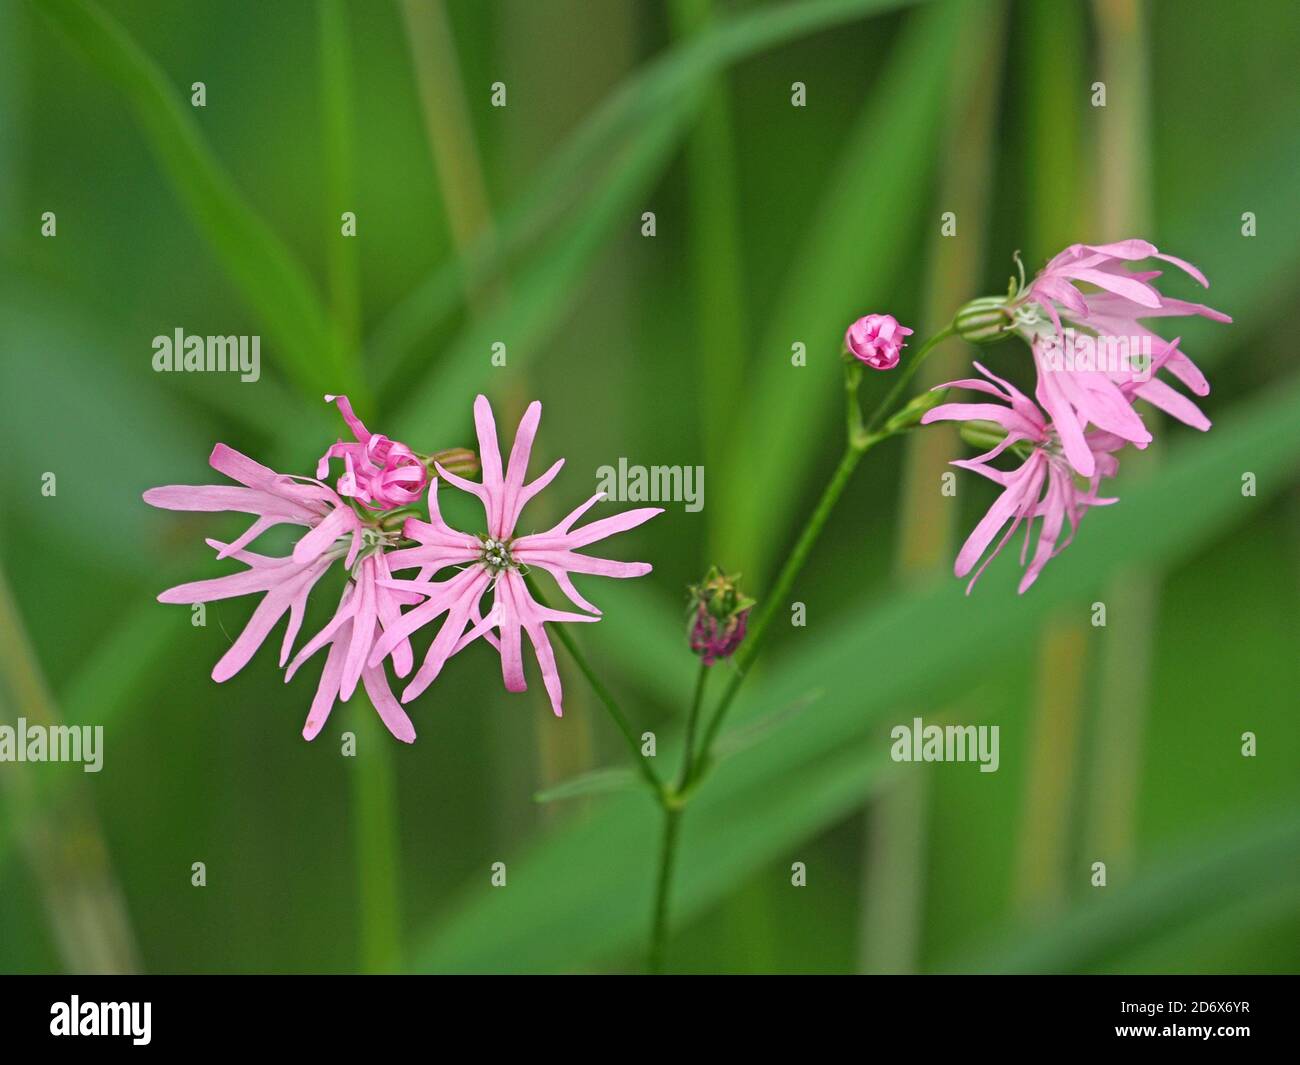 distinctive pink delicate flowers of Ragged Robin (Lychnis flos-cuculi) plant with untidy petals with divided lobes and buds in green meadow Stock Photo